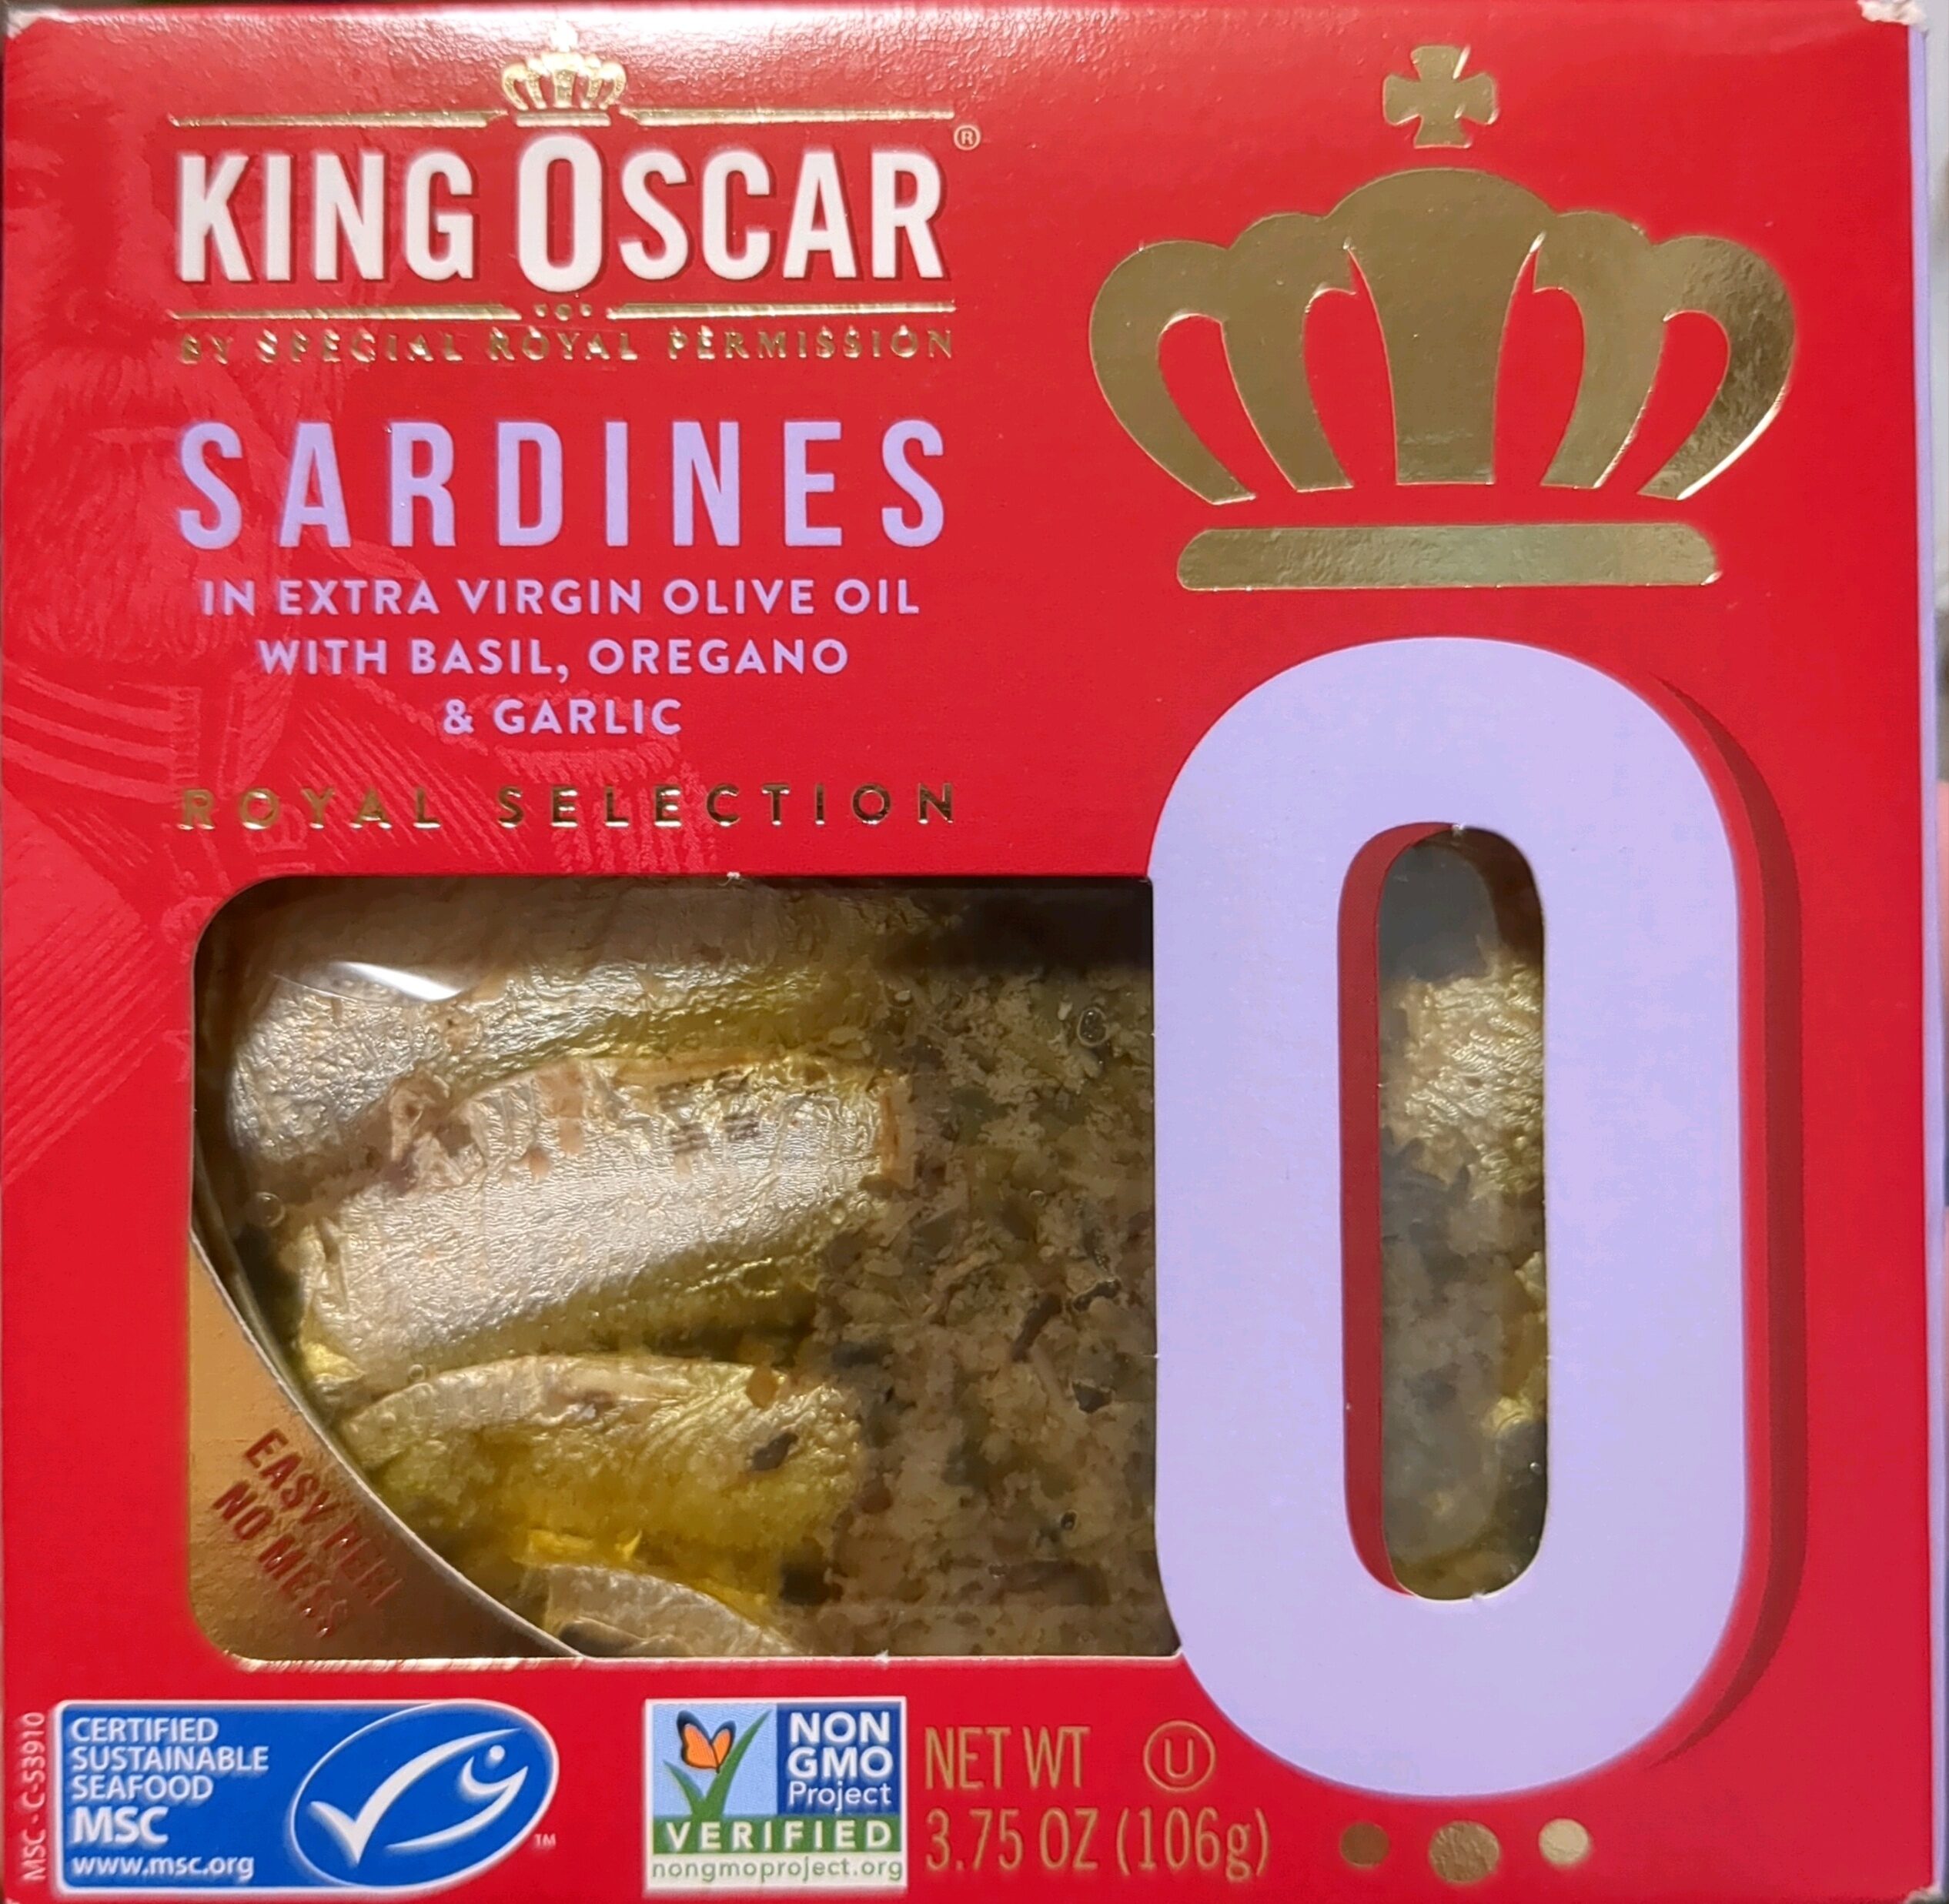 Sardines in extra virgin olive oil with Basil, Oregano, and Garlic - Product